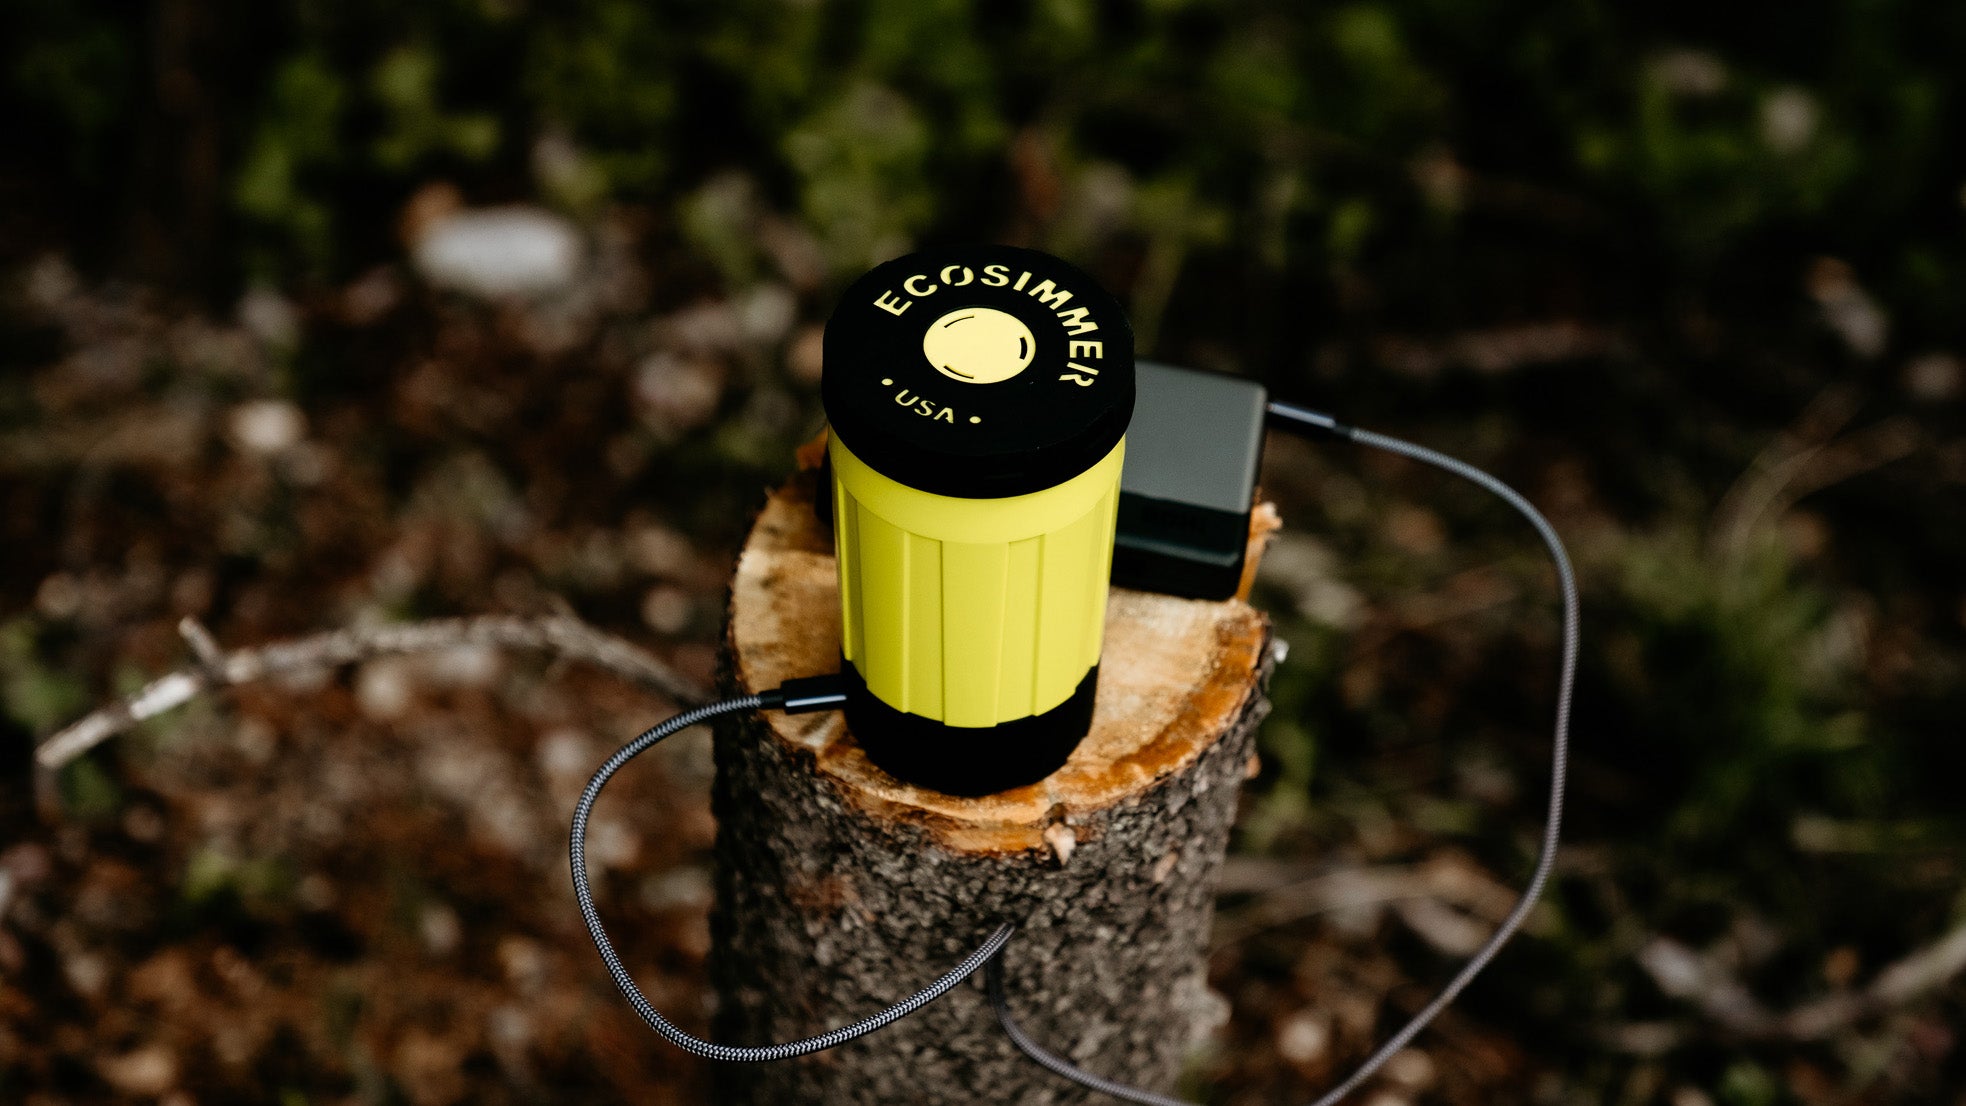 Electric backpacking and camping stove plugged into USB-C battery on tree stump